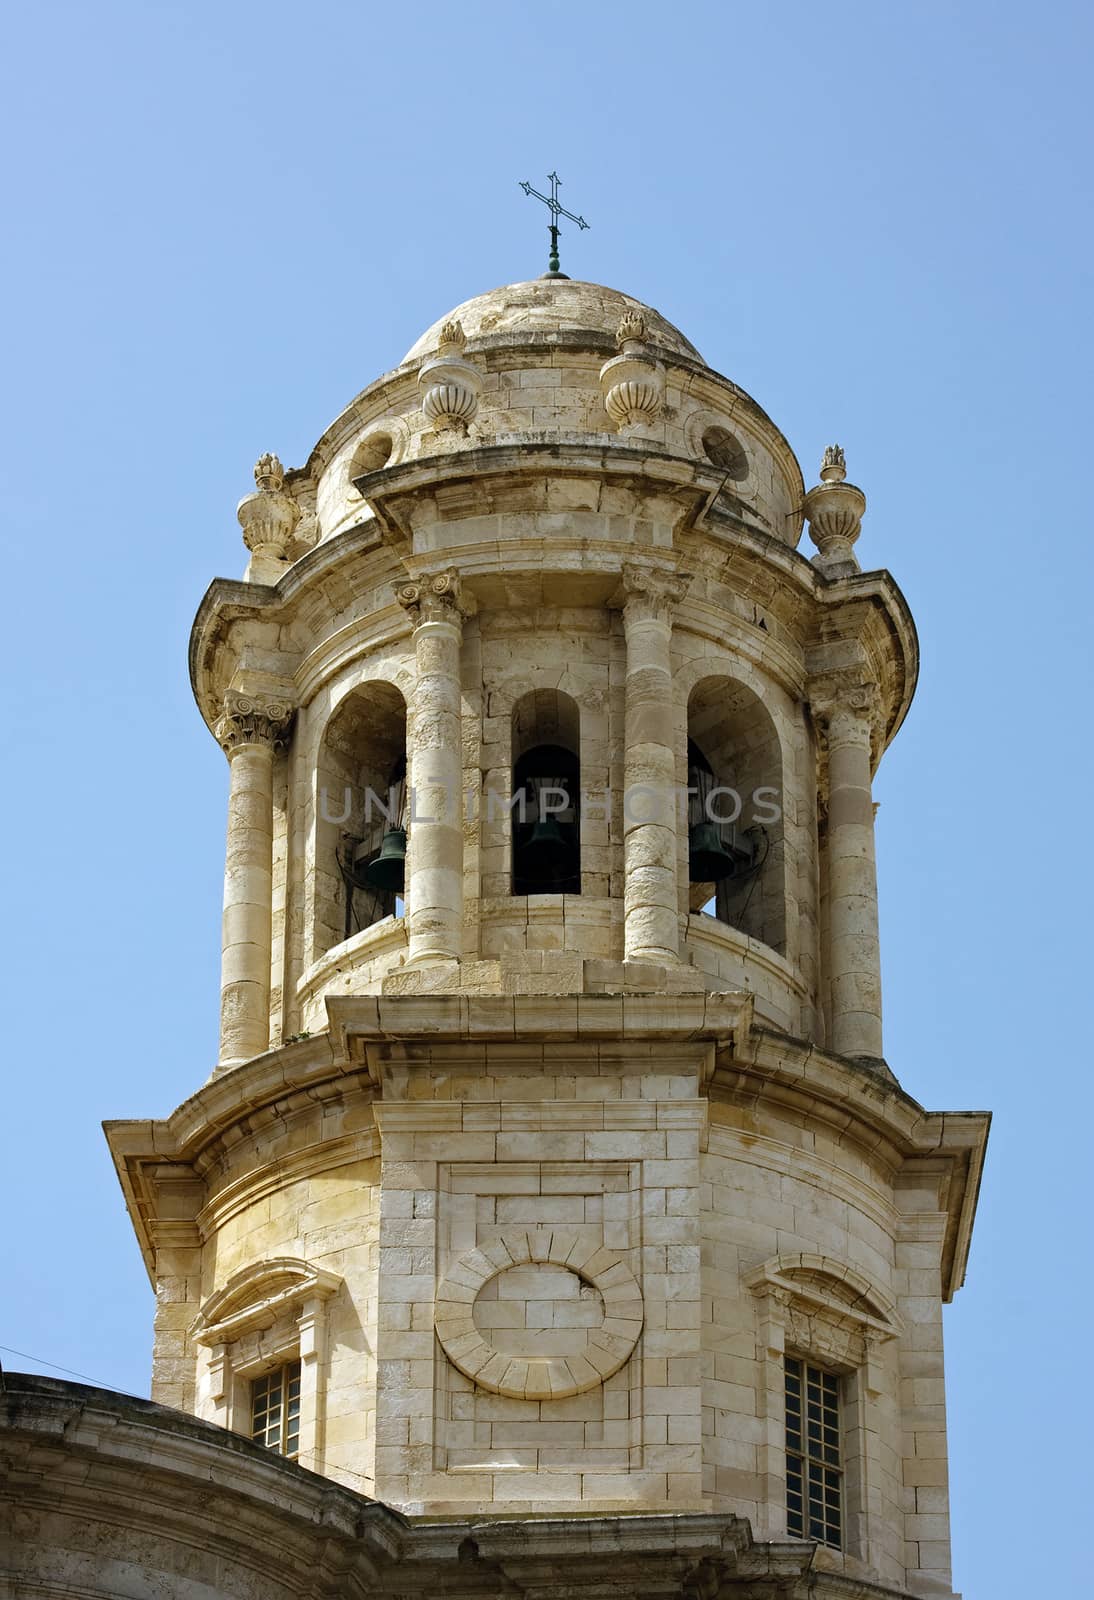 The Poniente or West Tower is one of two bell towers of Cadiz Cathedral as viewed from cathedral square in Cadiz, Spain.